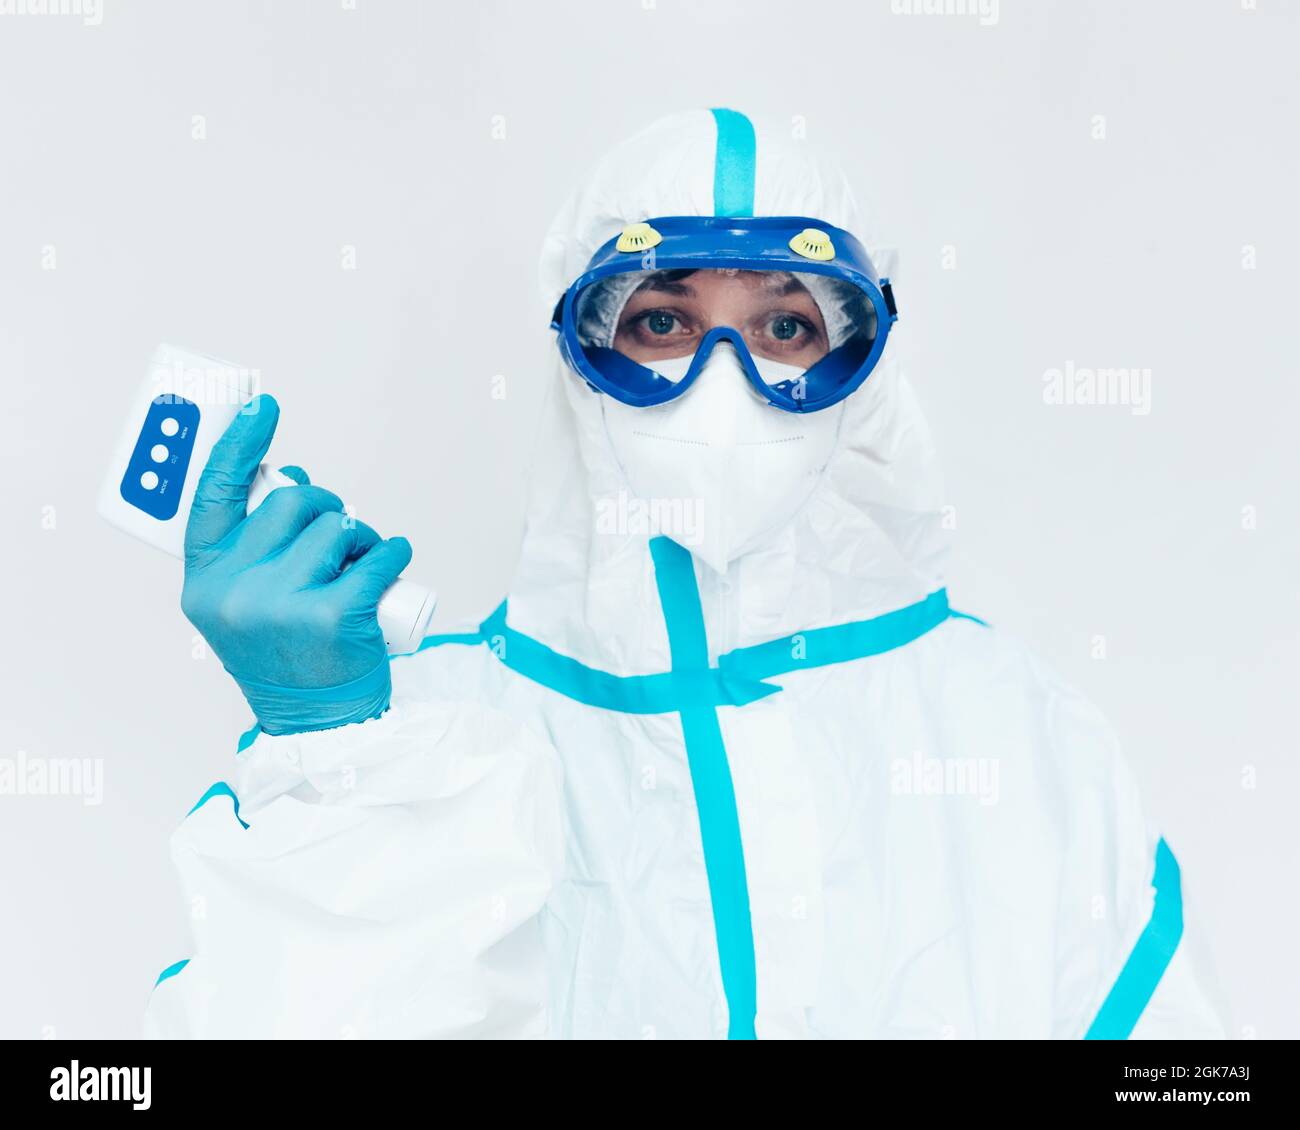 A medic in a protective medical suit and mask holds a modern infrared thermometer in his hand. Measurement of body temperature with a non-contact thermometer. Covid-19 disease control. Stock Photo